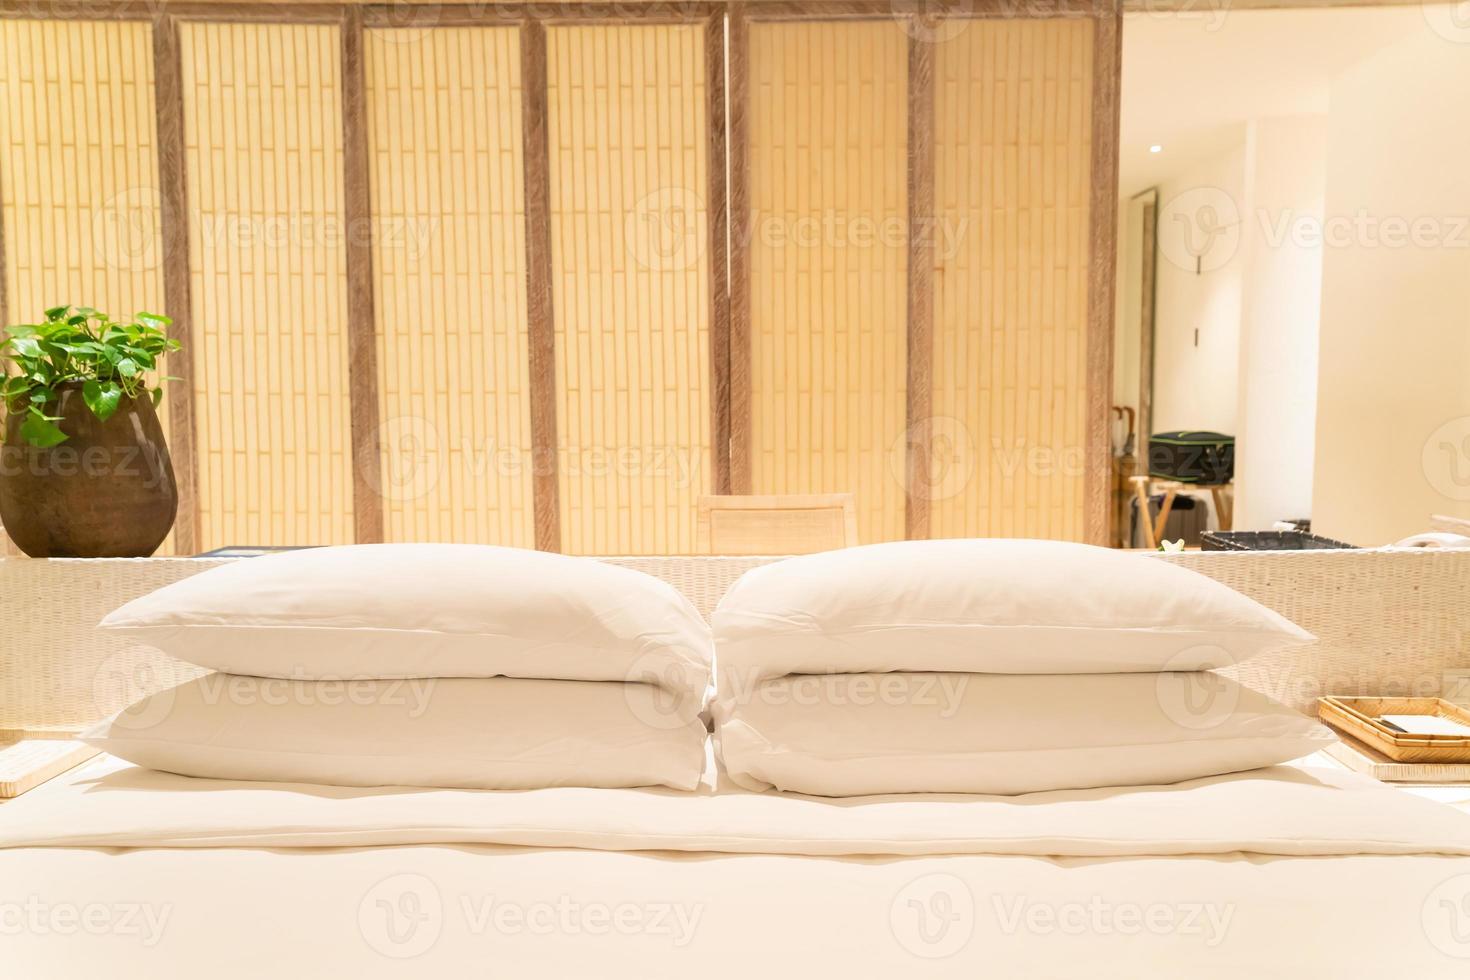 White pillows decoration on bed in luxury hotel resort bedroom photo